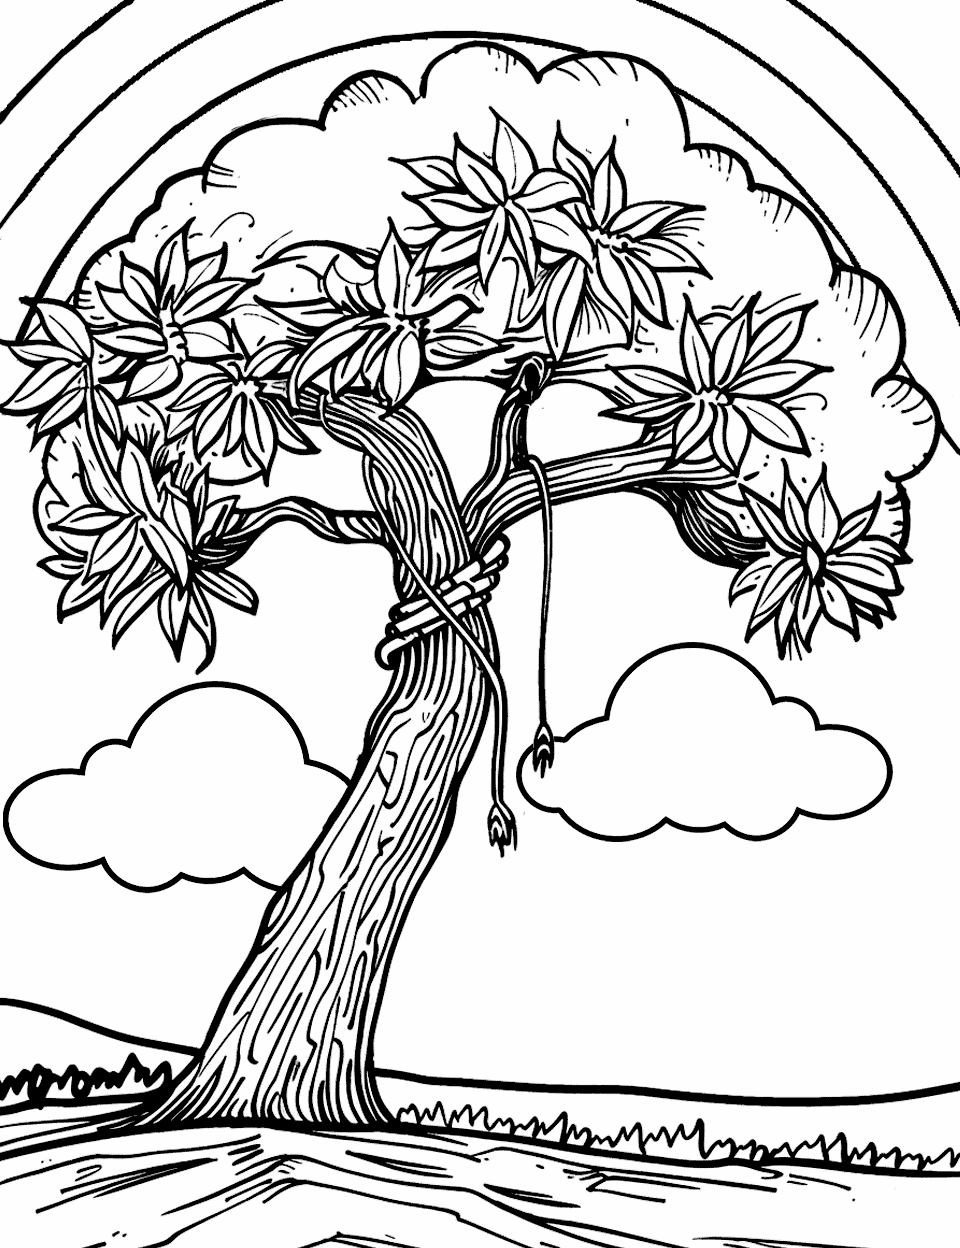 Rainbow Behind a Tree Coloring Page - A large tree in the foreground with a vibrant rainbow in the background.